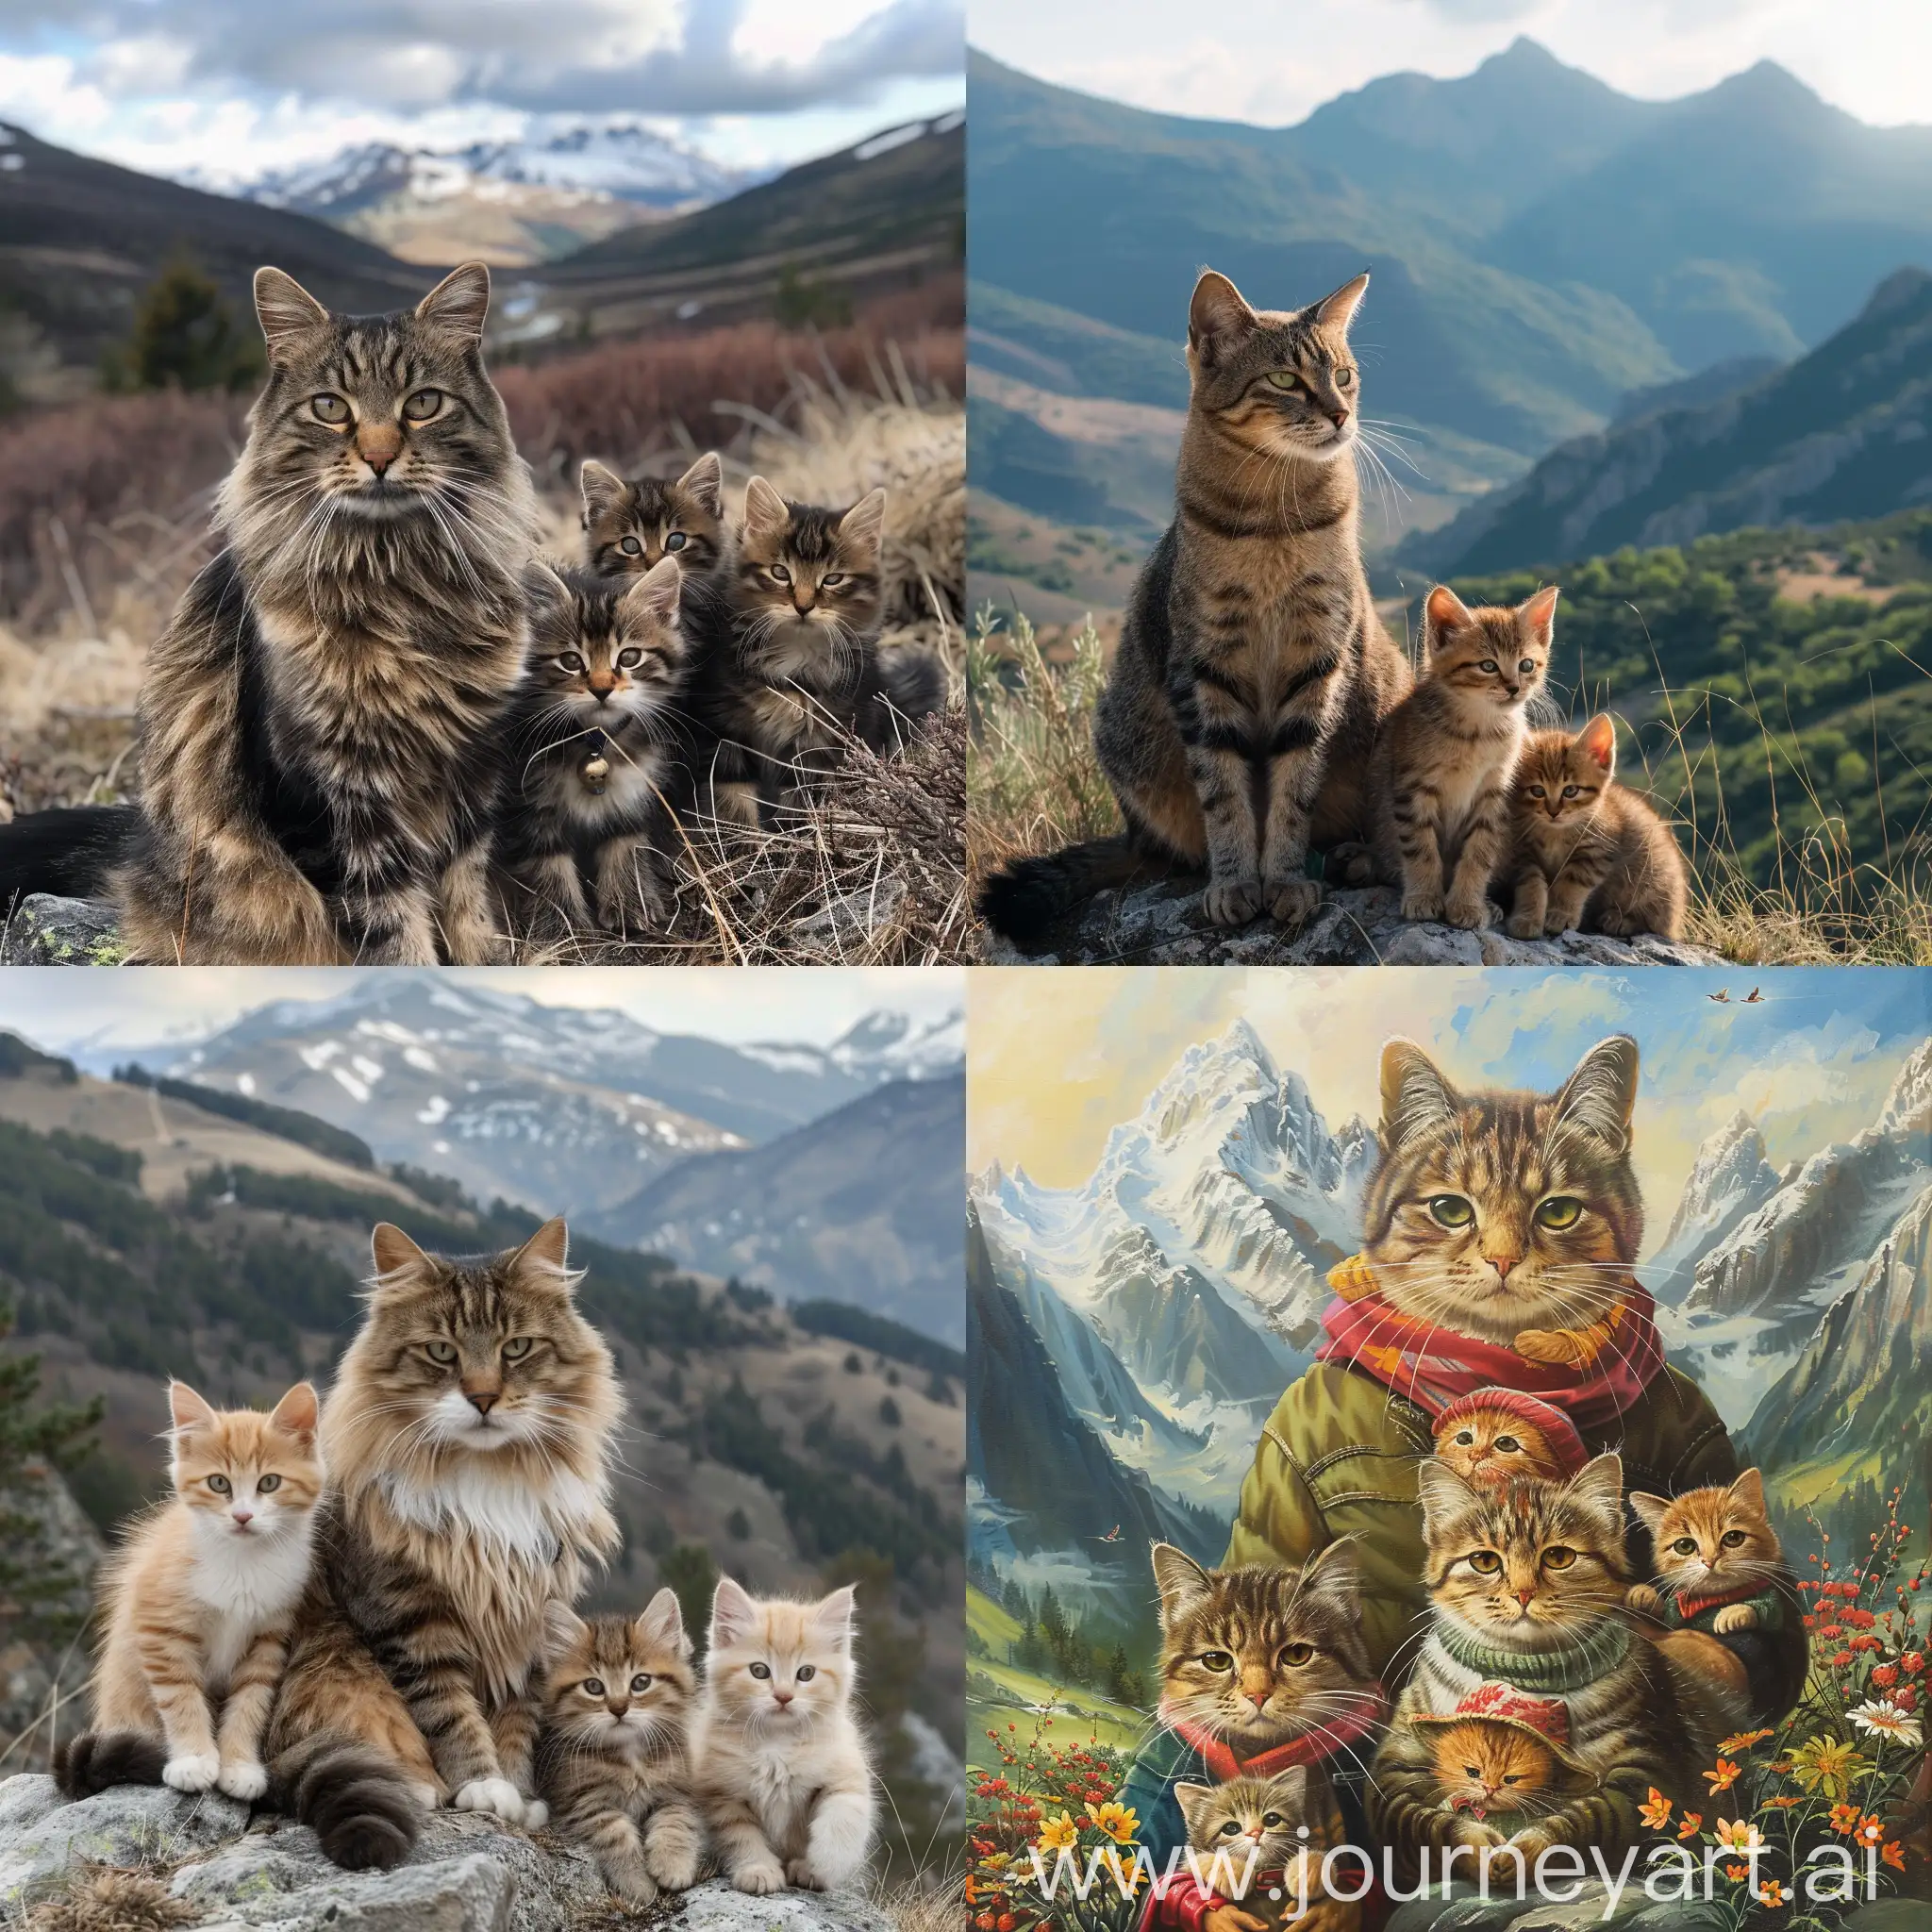 Mountain-Adventure-Cat-Family-Exploring-the-Wilderness